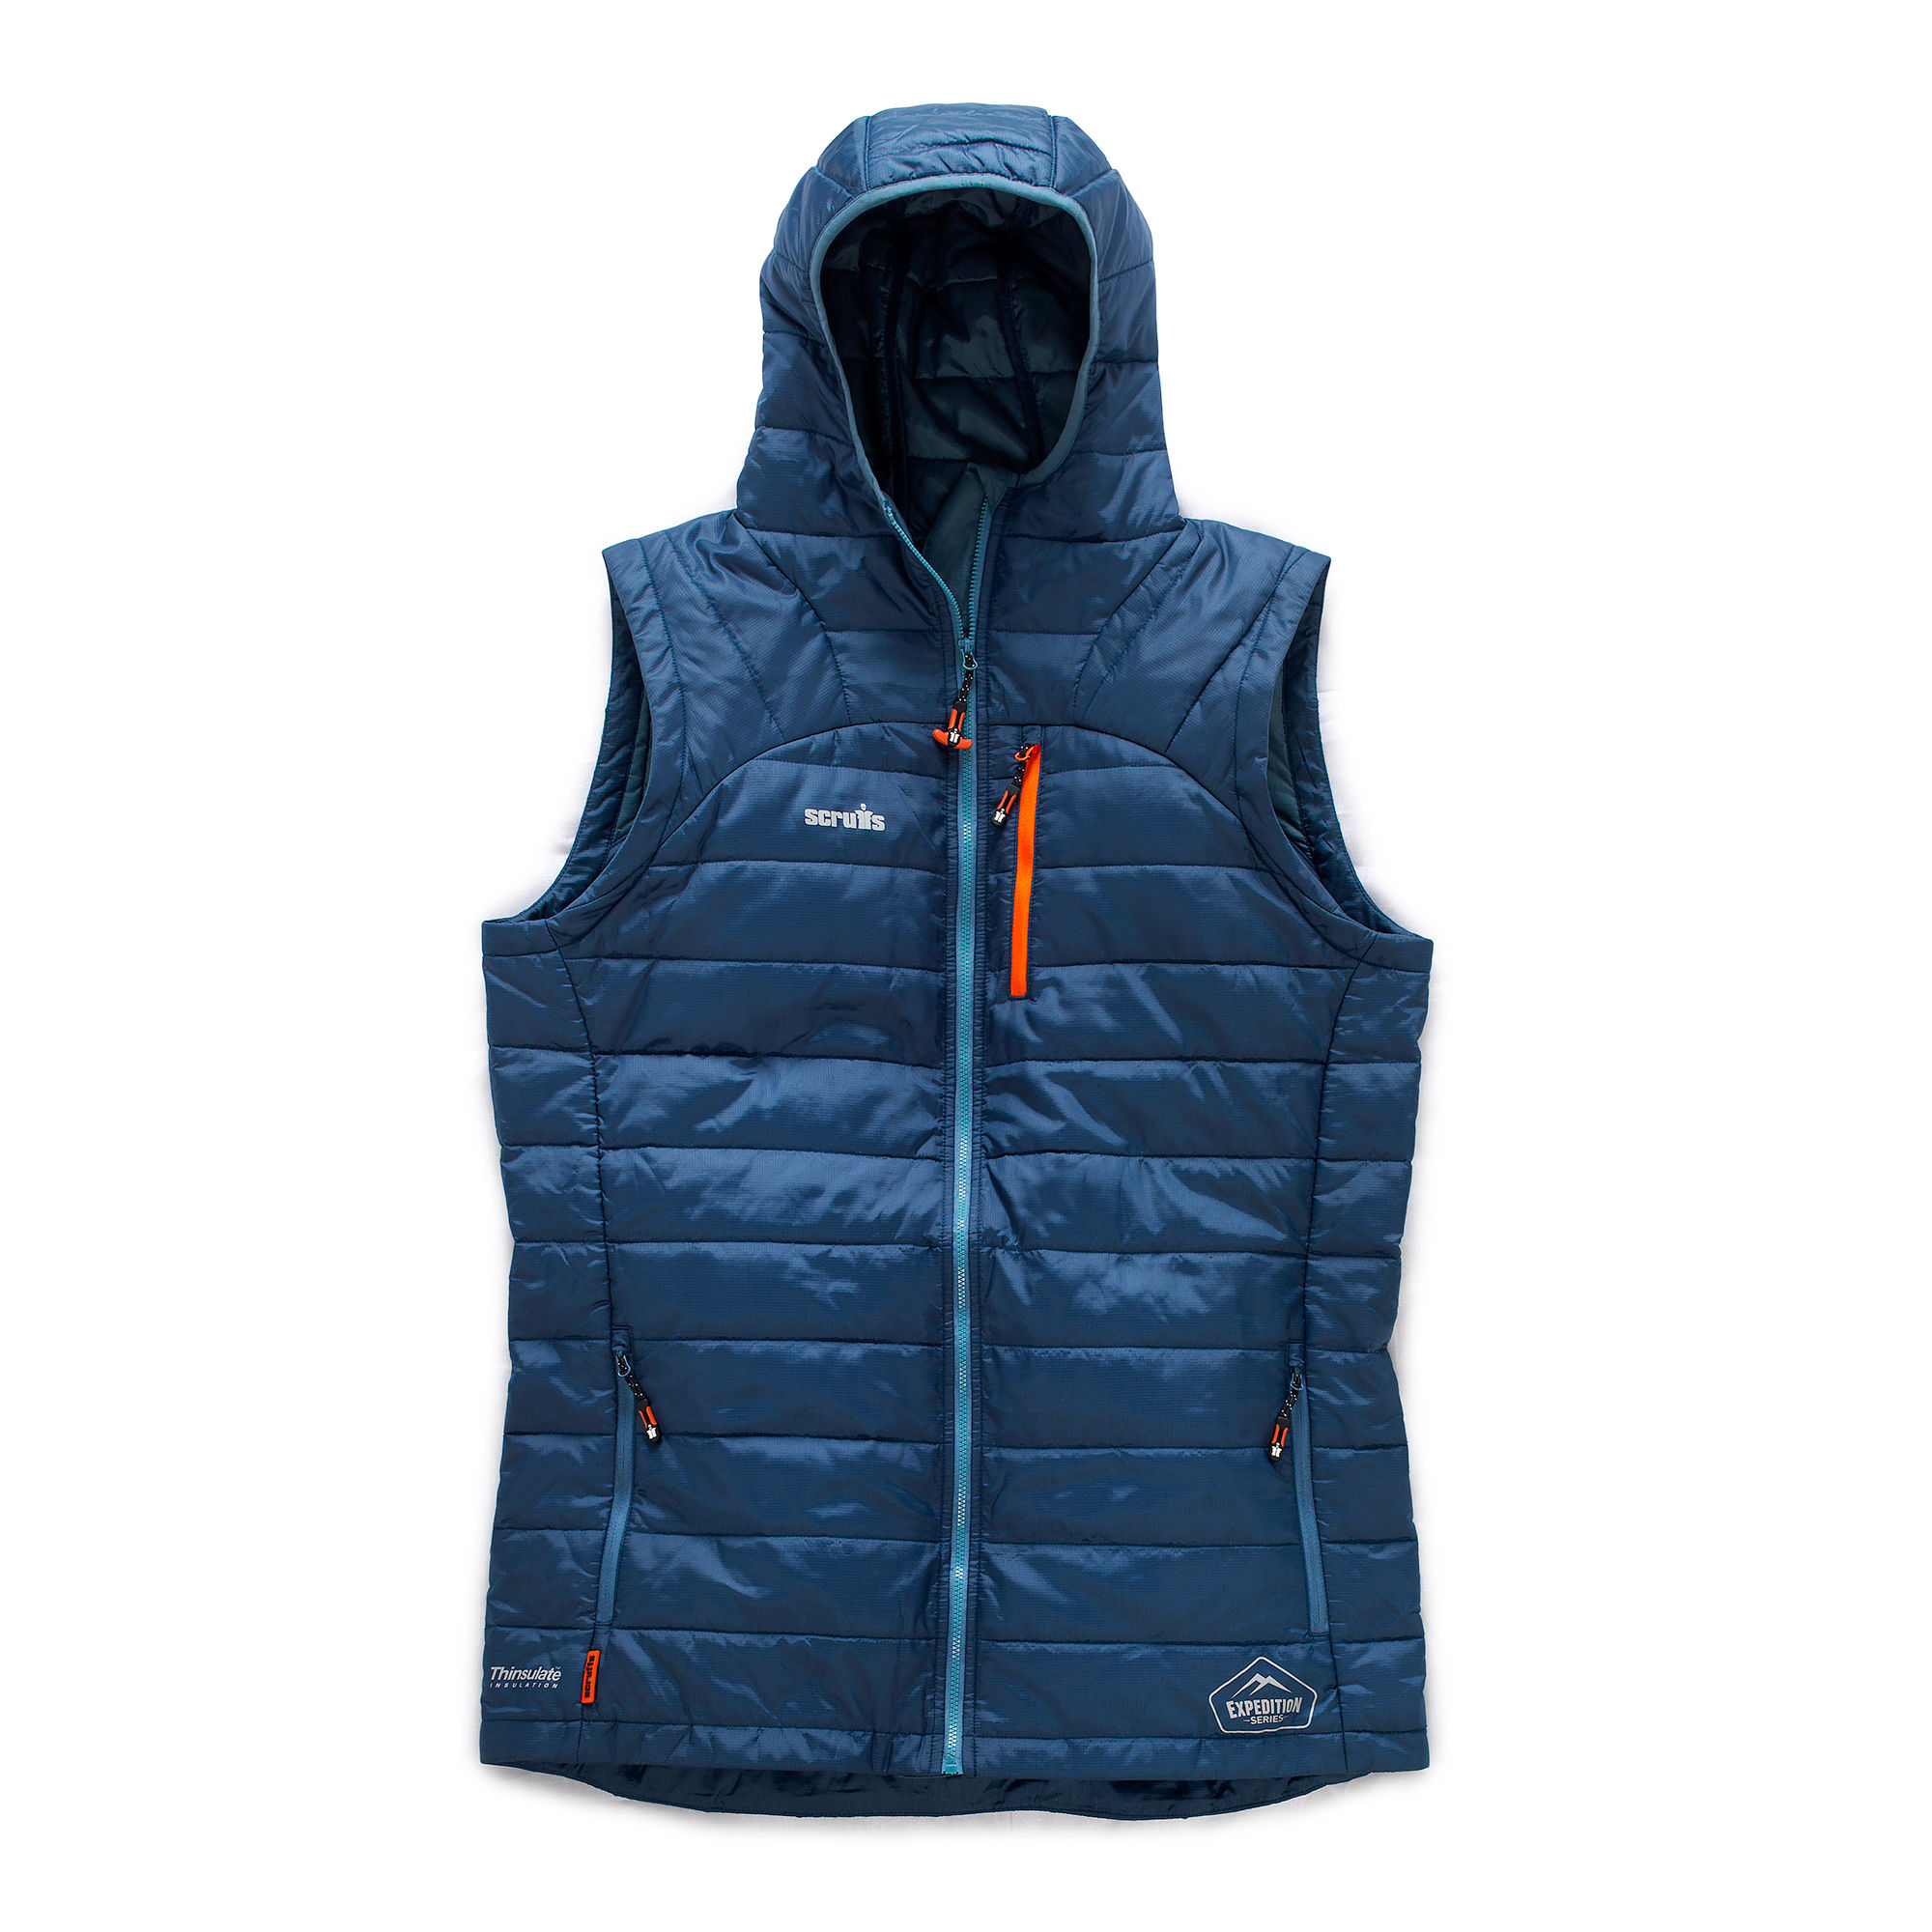 Scruffs Expedition Thermo Gilet-Blue-XL